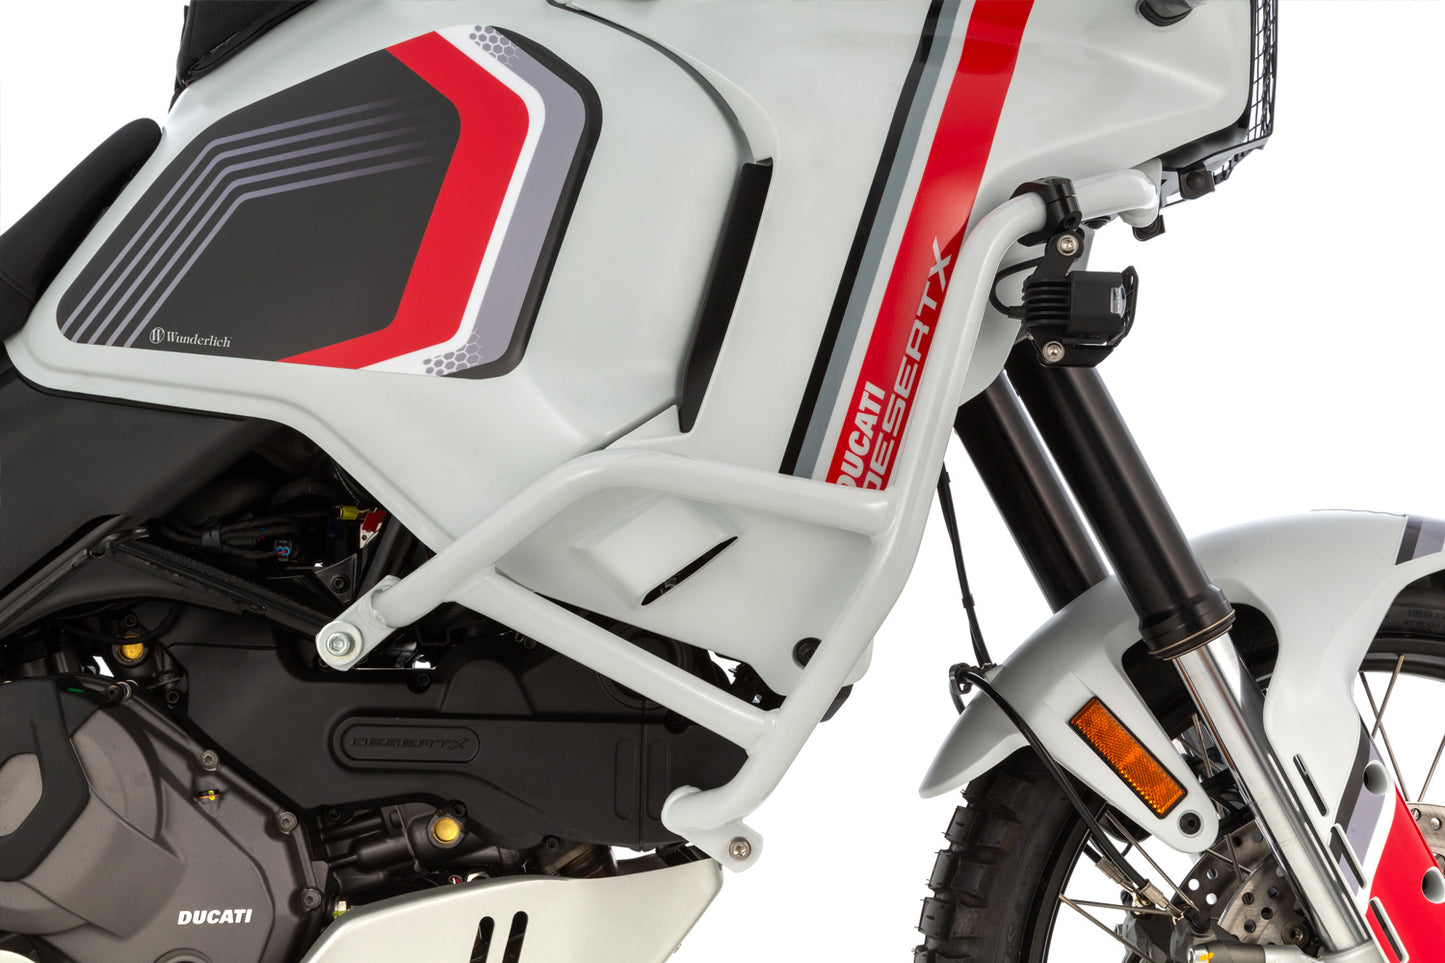 Wunderlich fairing protection bar - white - For models with Standard engine protection